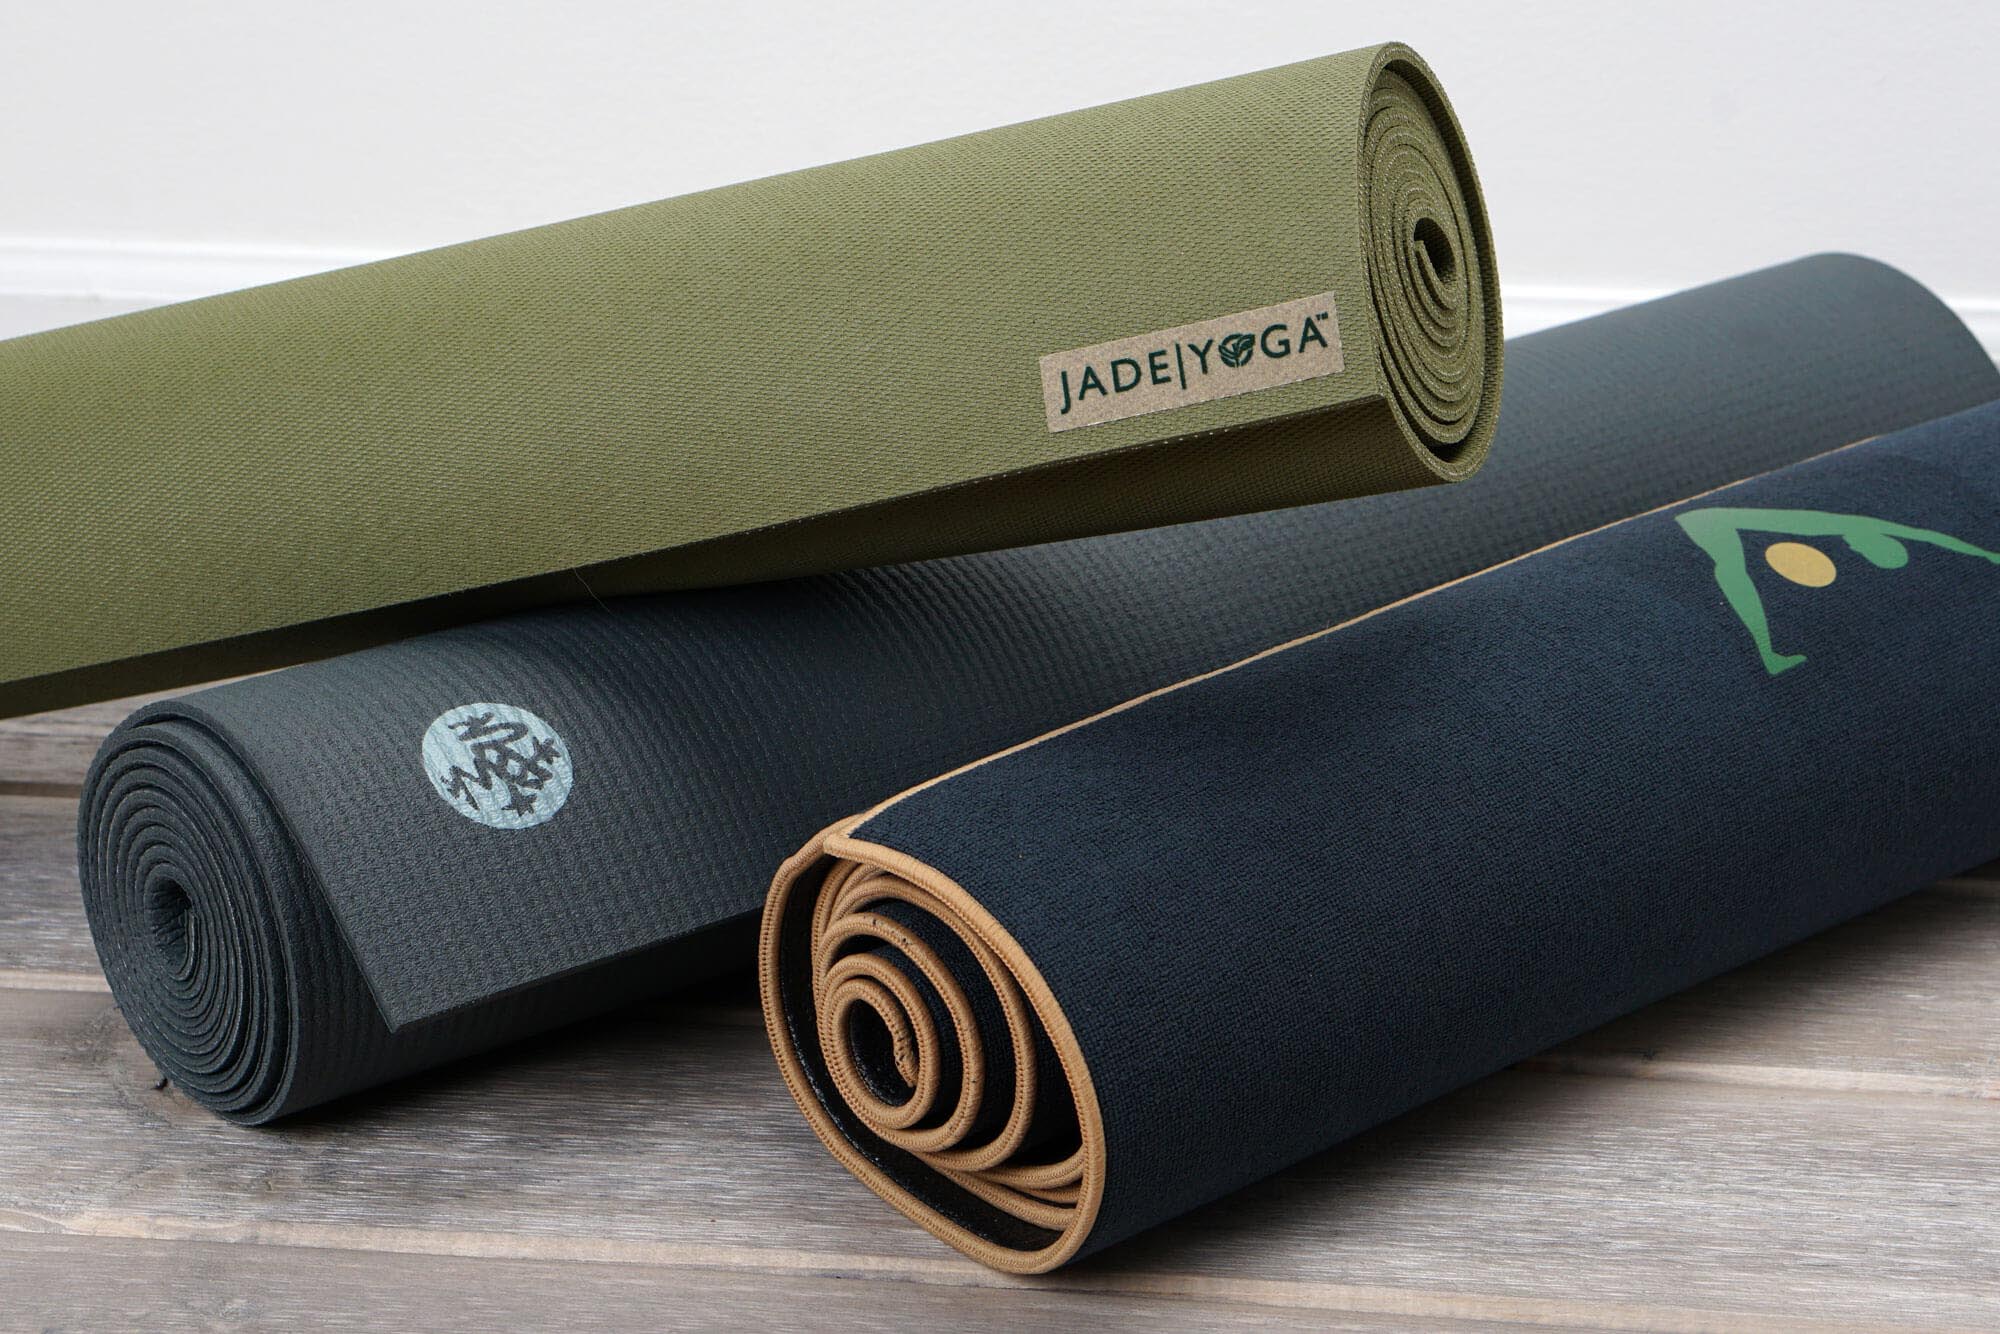 Microfiber Eco-friendly yoga mat for kids. Natural Rubber My Yogis Washable 